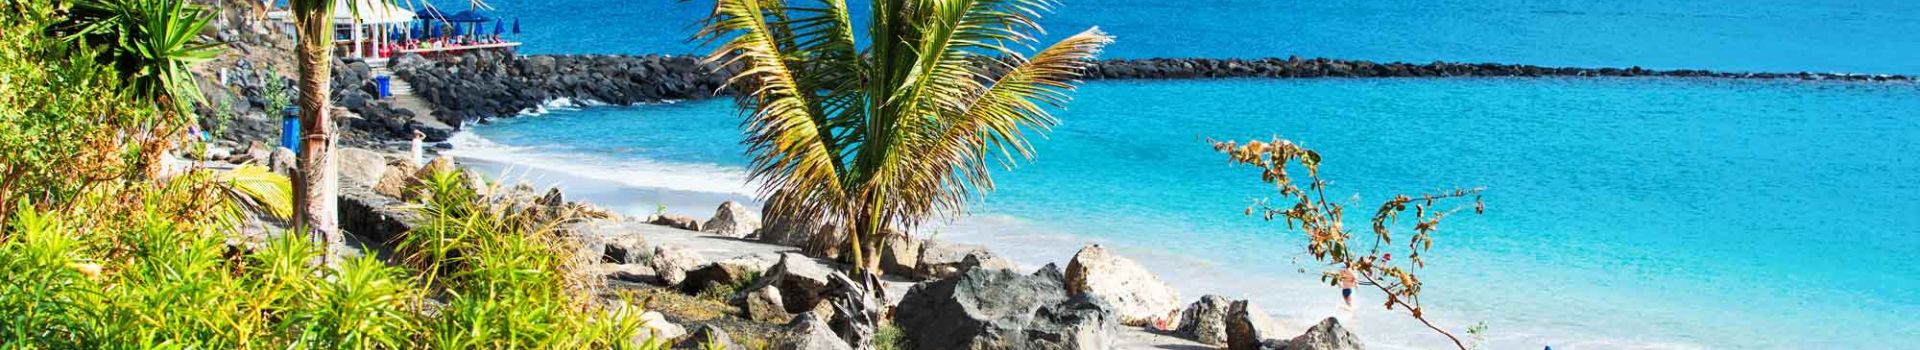 All Inclusive Holidays to Lanzarote with Cassidy Travel